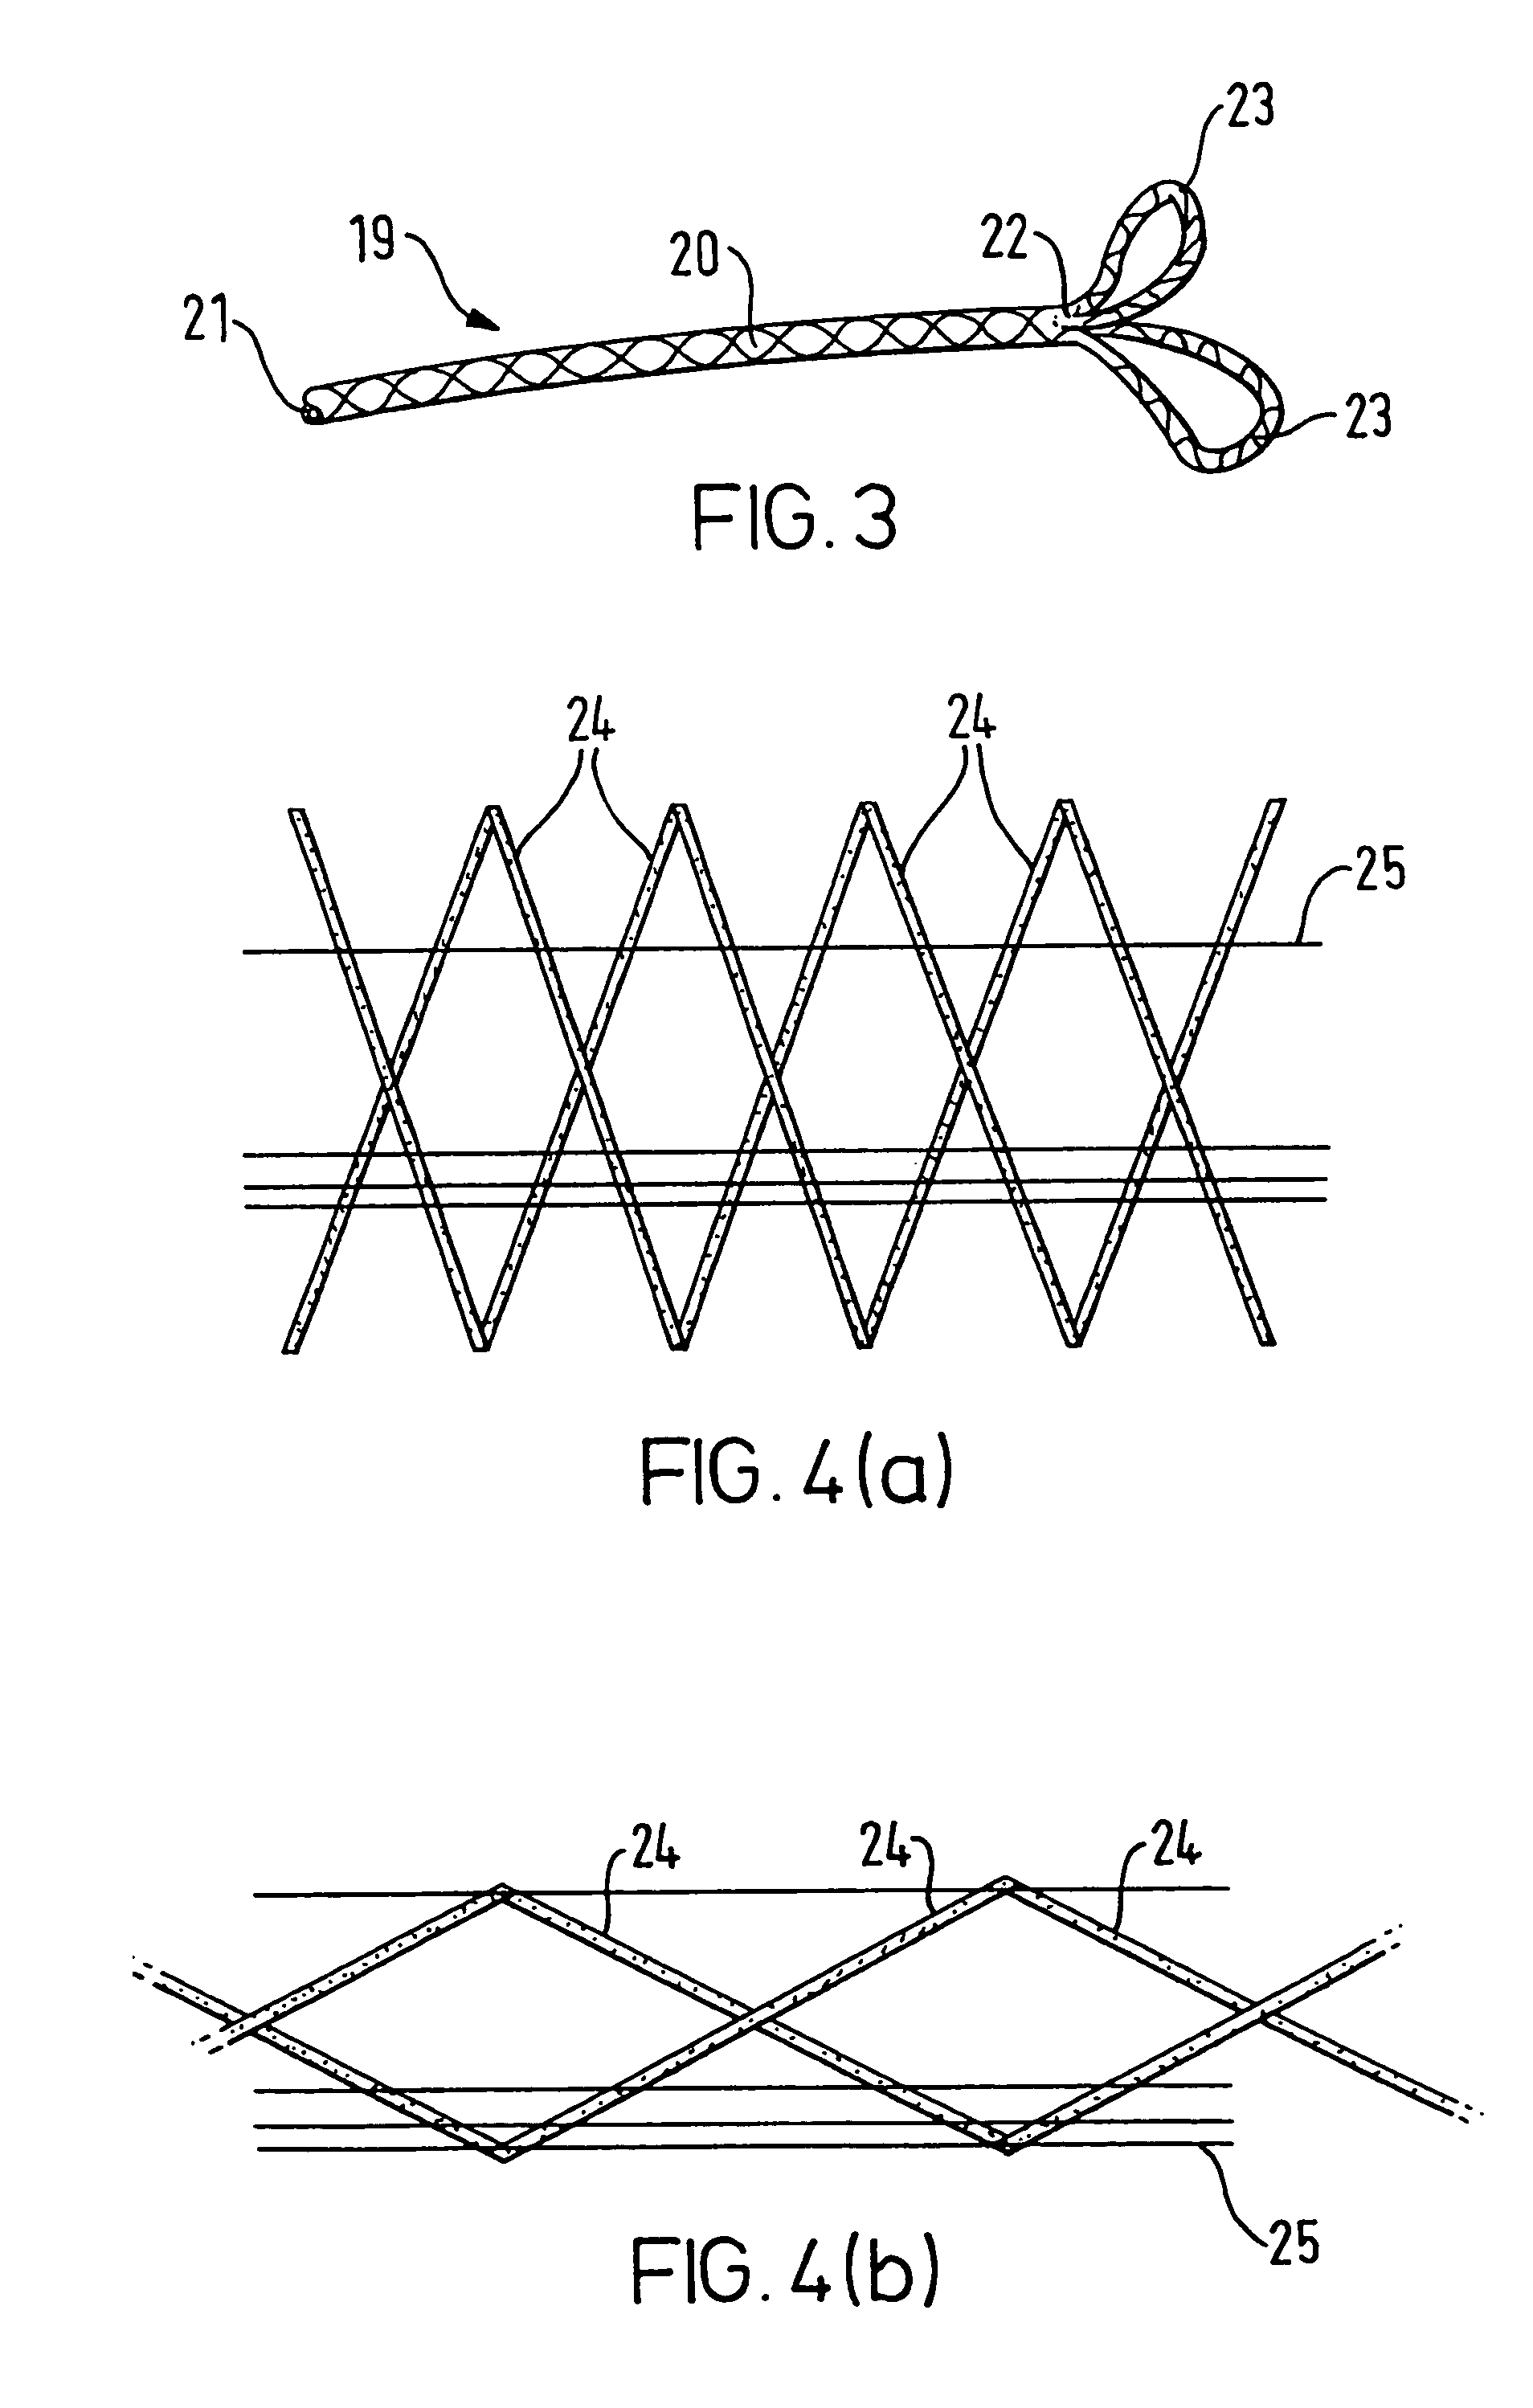 Method of securing a line to a patient, fasteners and their use to secure a line to a patient